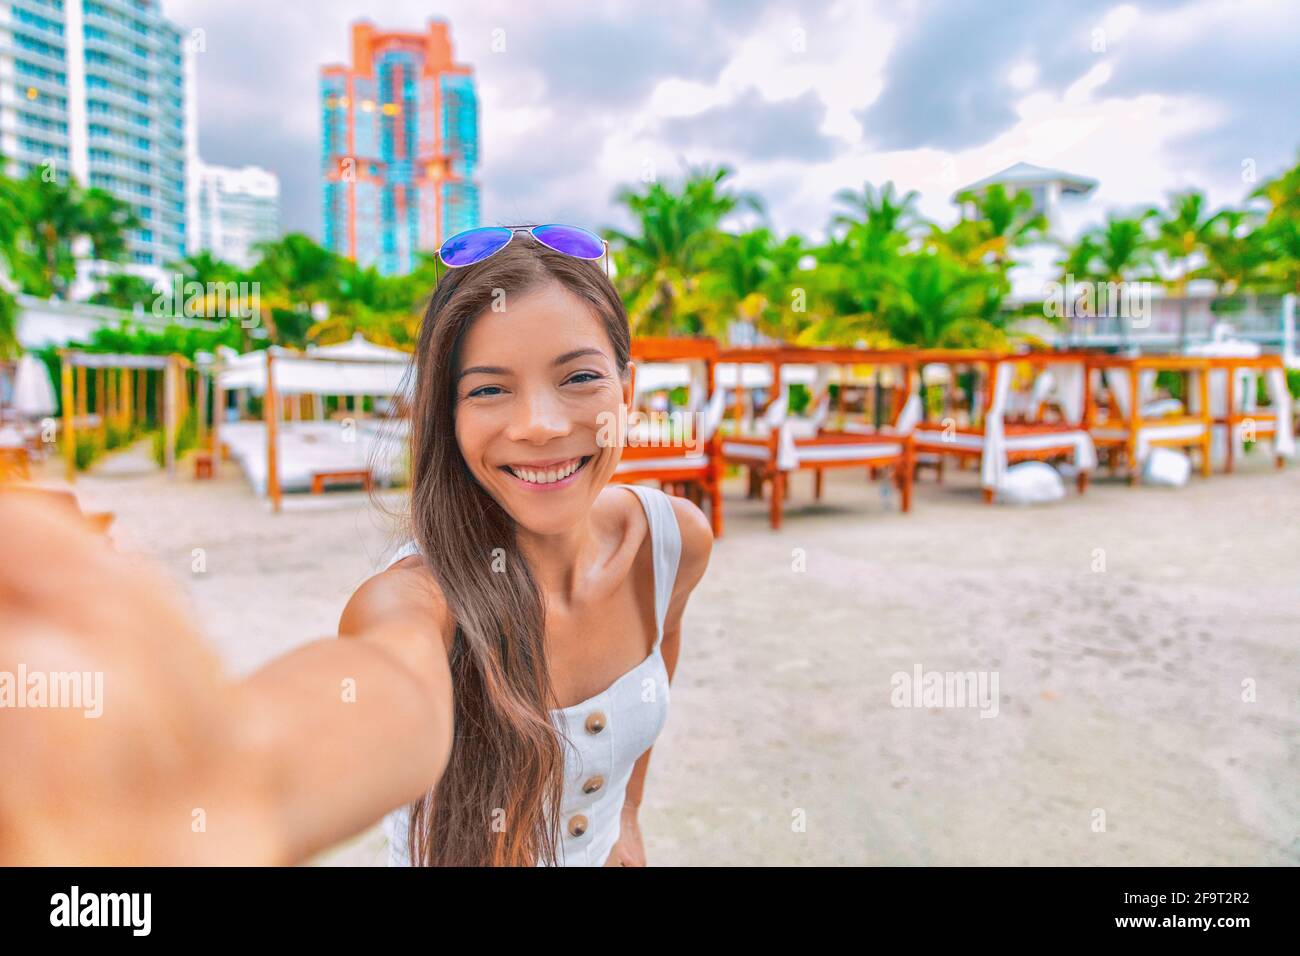 Travel Selfie Asian Tourist Woman On Vacation On South Beach Resort